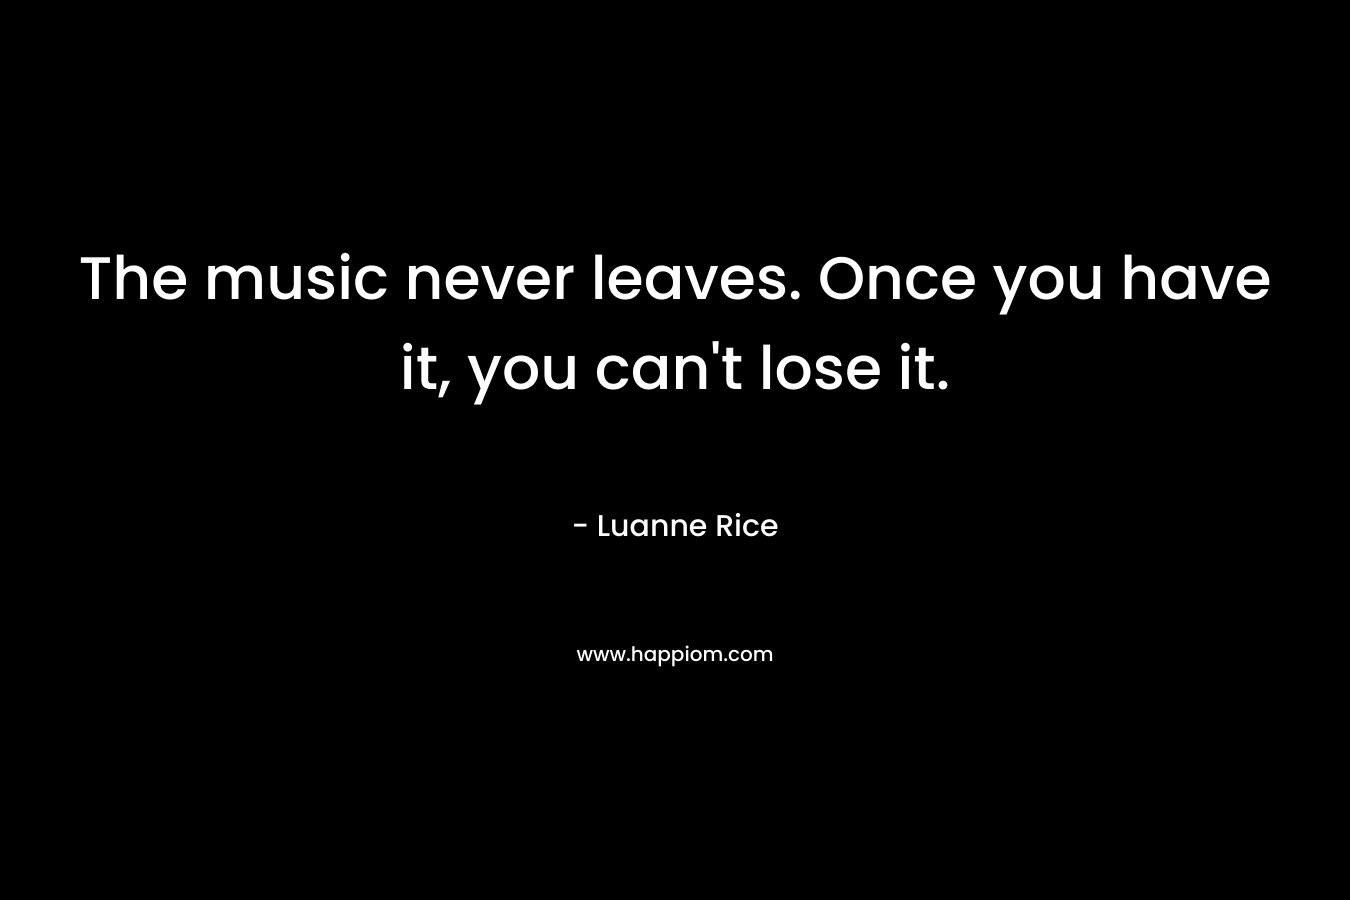 The music never leaves. Once you have it, you can't lose it.